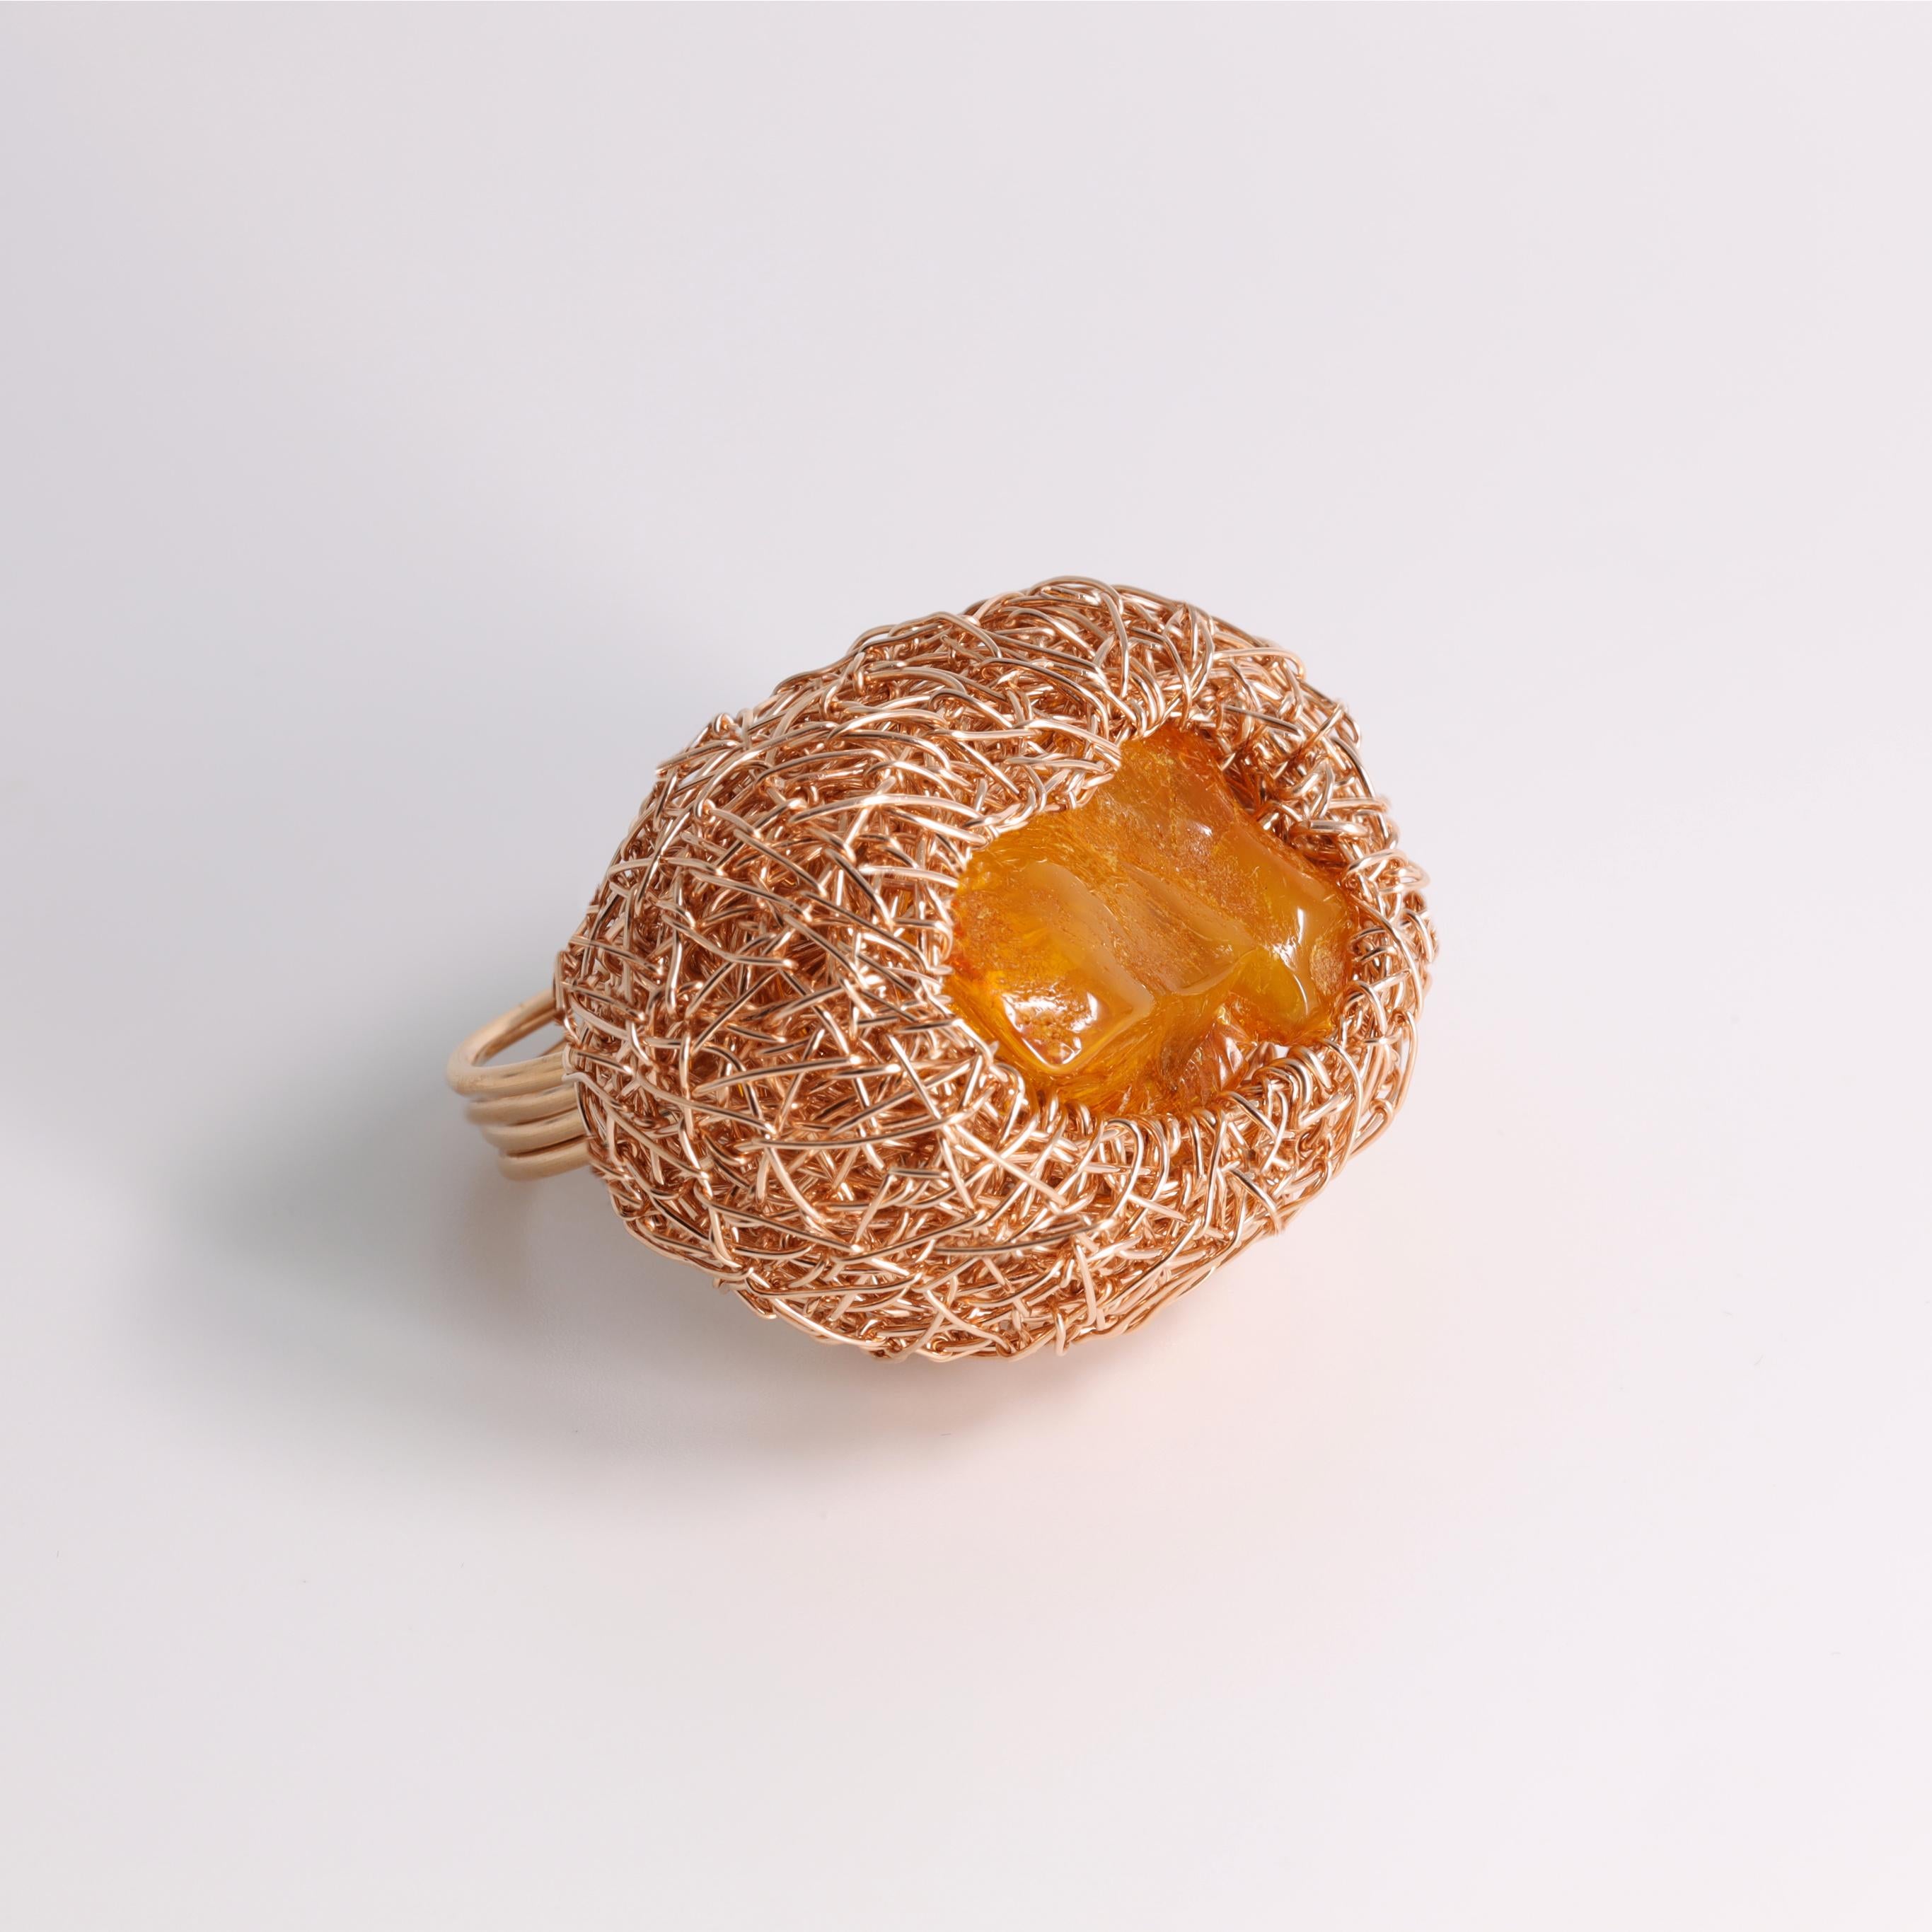 Natural Baltic Amber in 14kt Rose Goldfilled Unique Cocktail Ring by the Artist For Sale 4